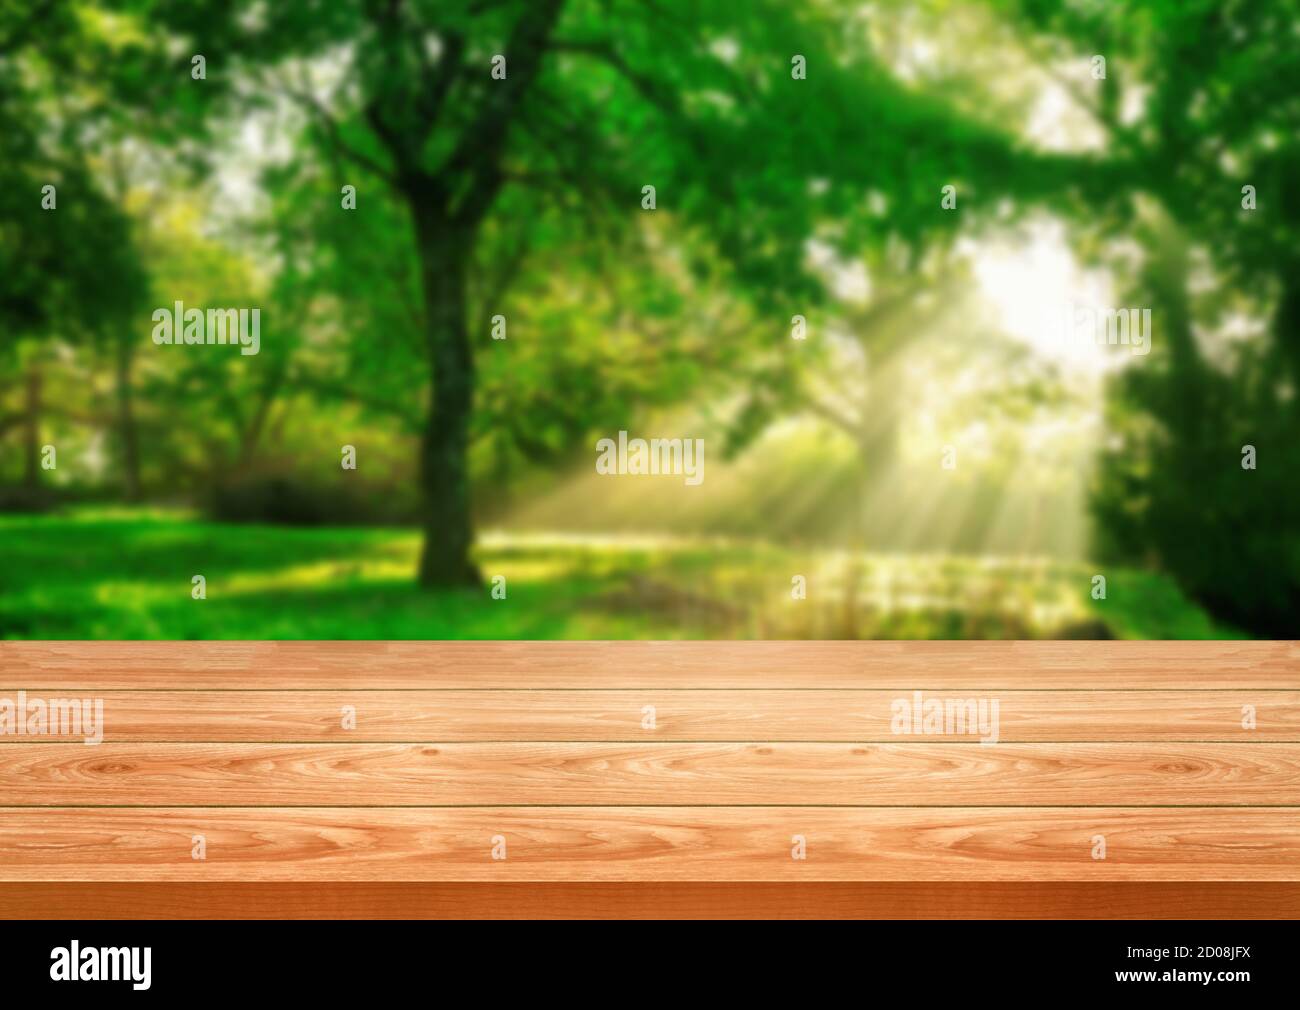 Brown wood table in green blur nature background of trees and grass in the park with empty copy space on the table for product display mockup. Fresh Stock Photo